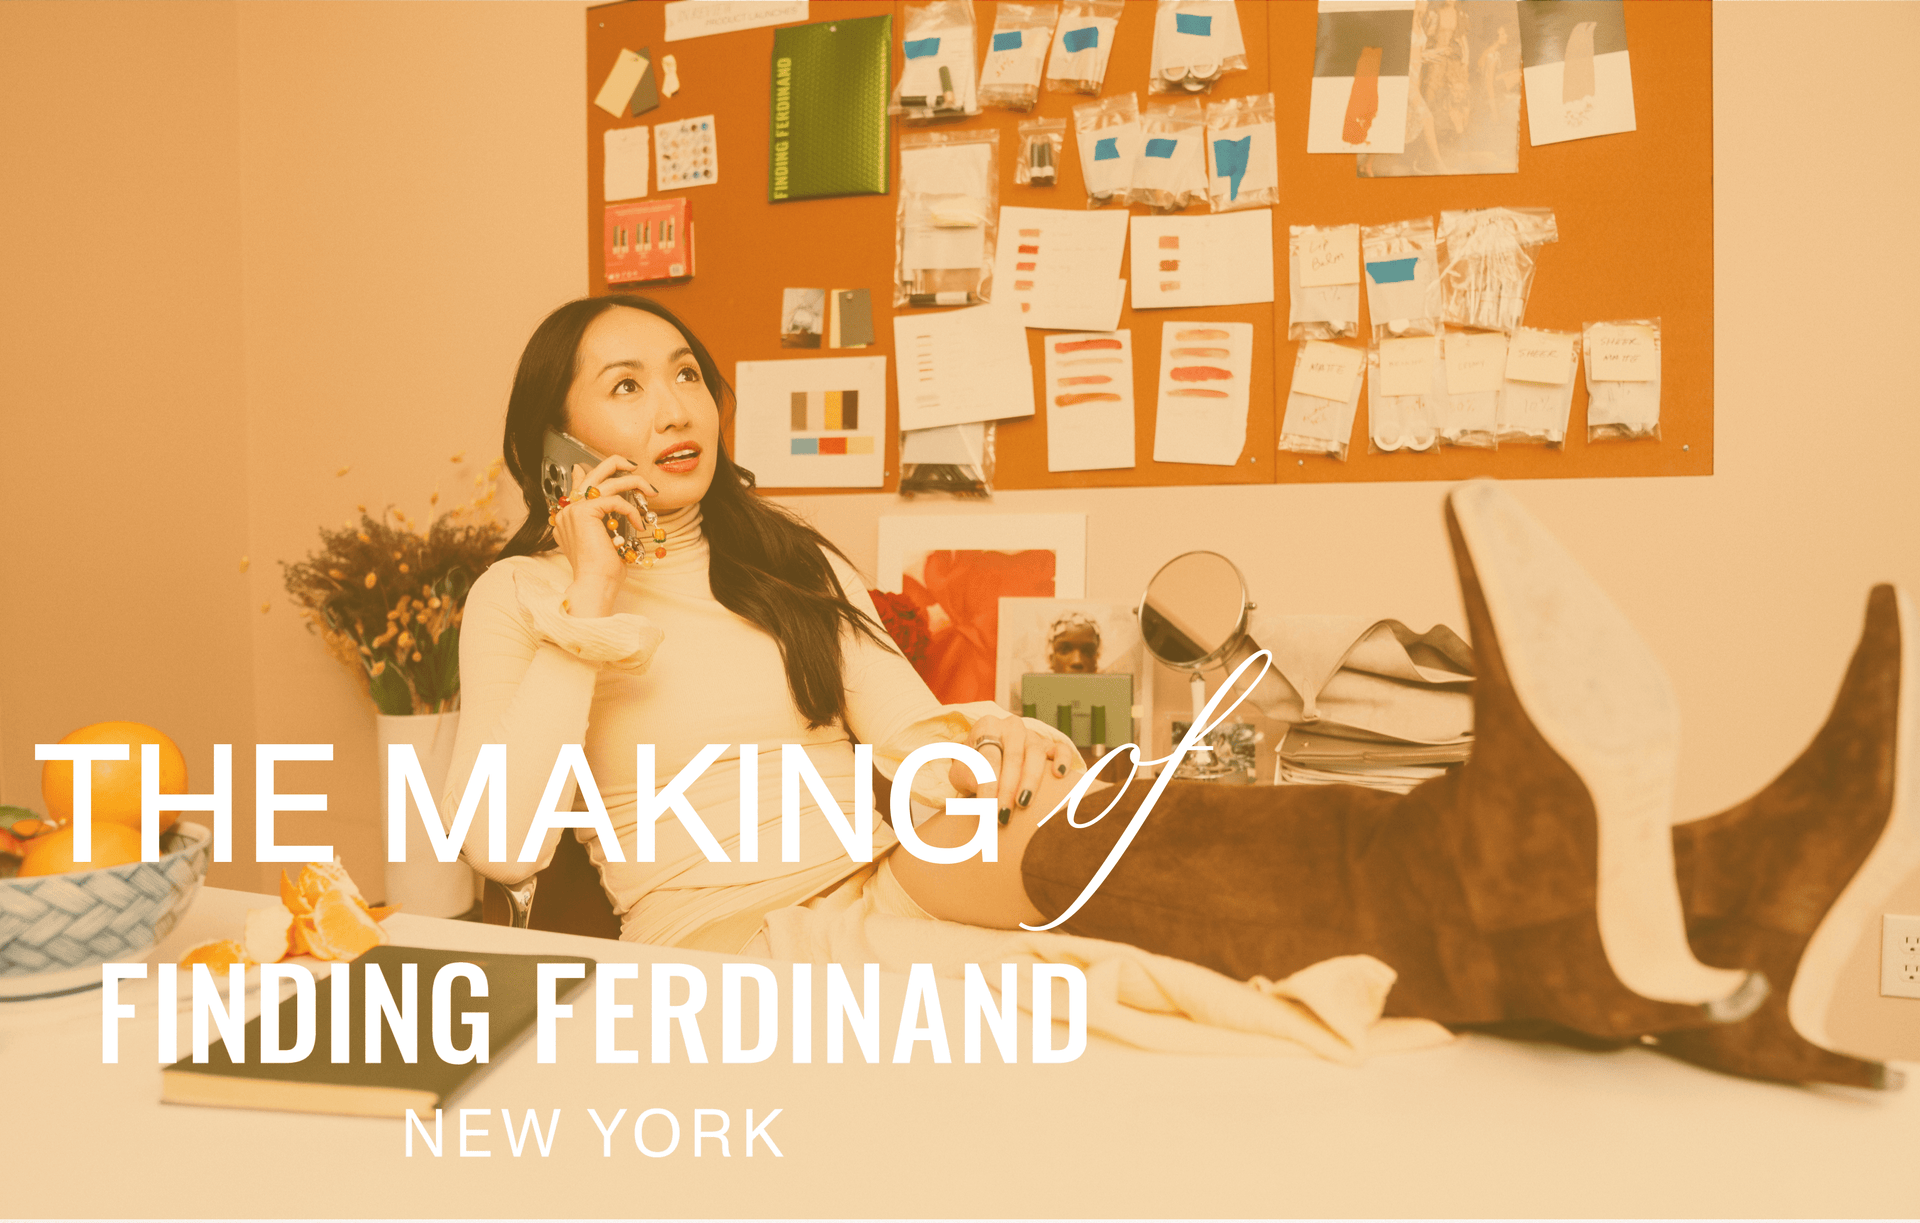 Load video: Founder video of the making of Finding Ferdiand